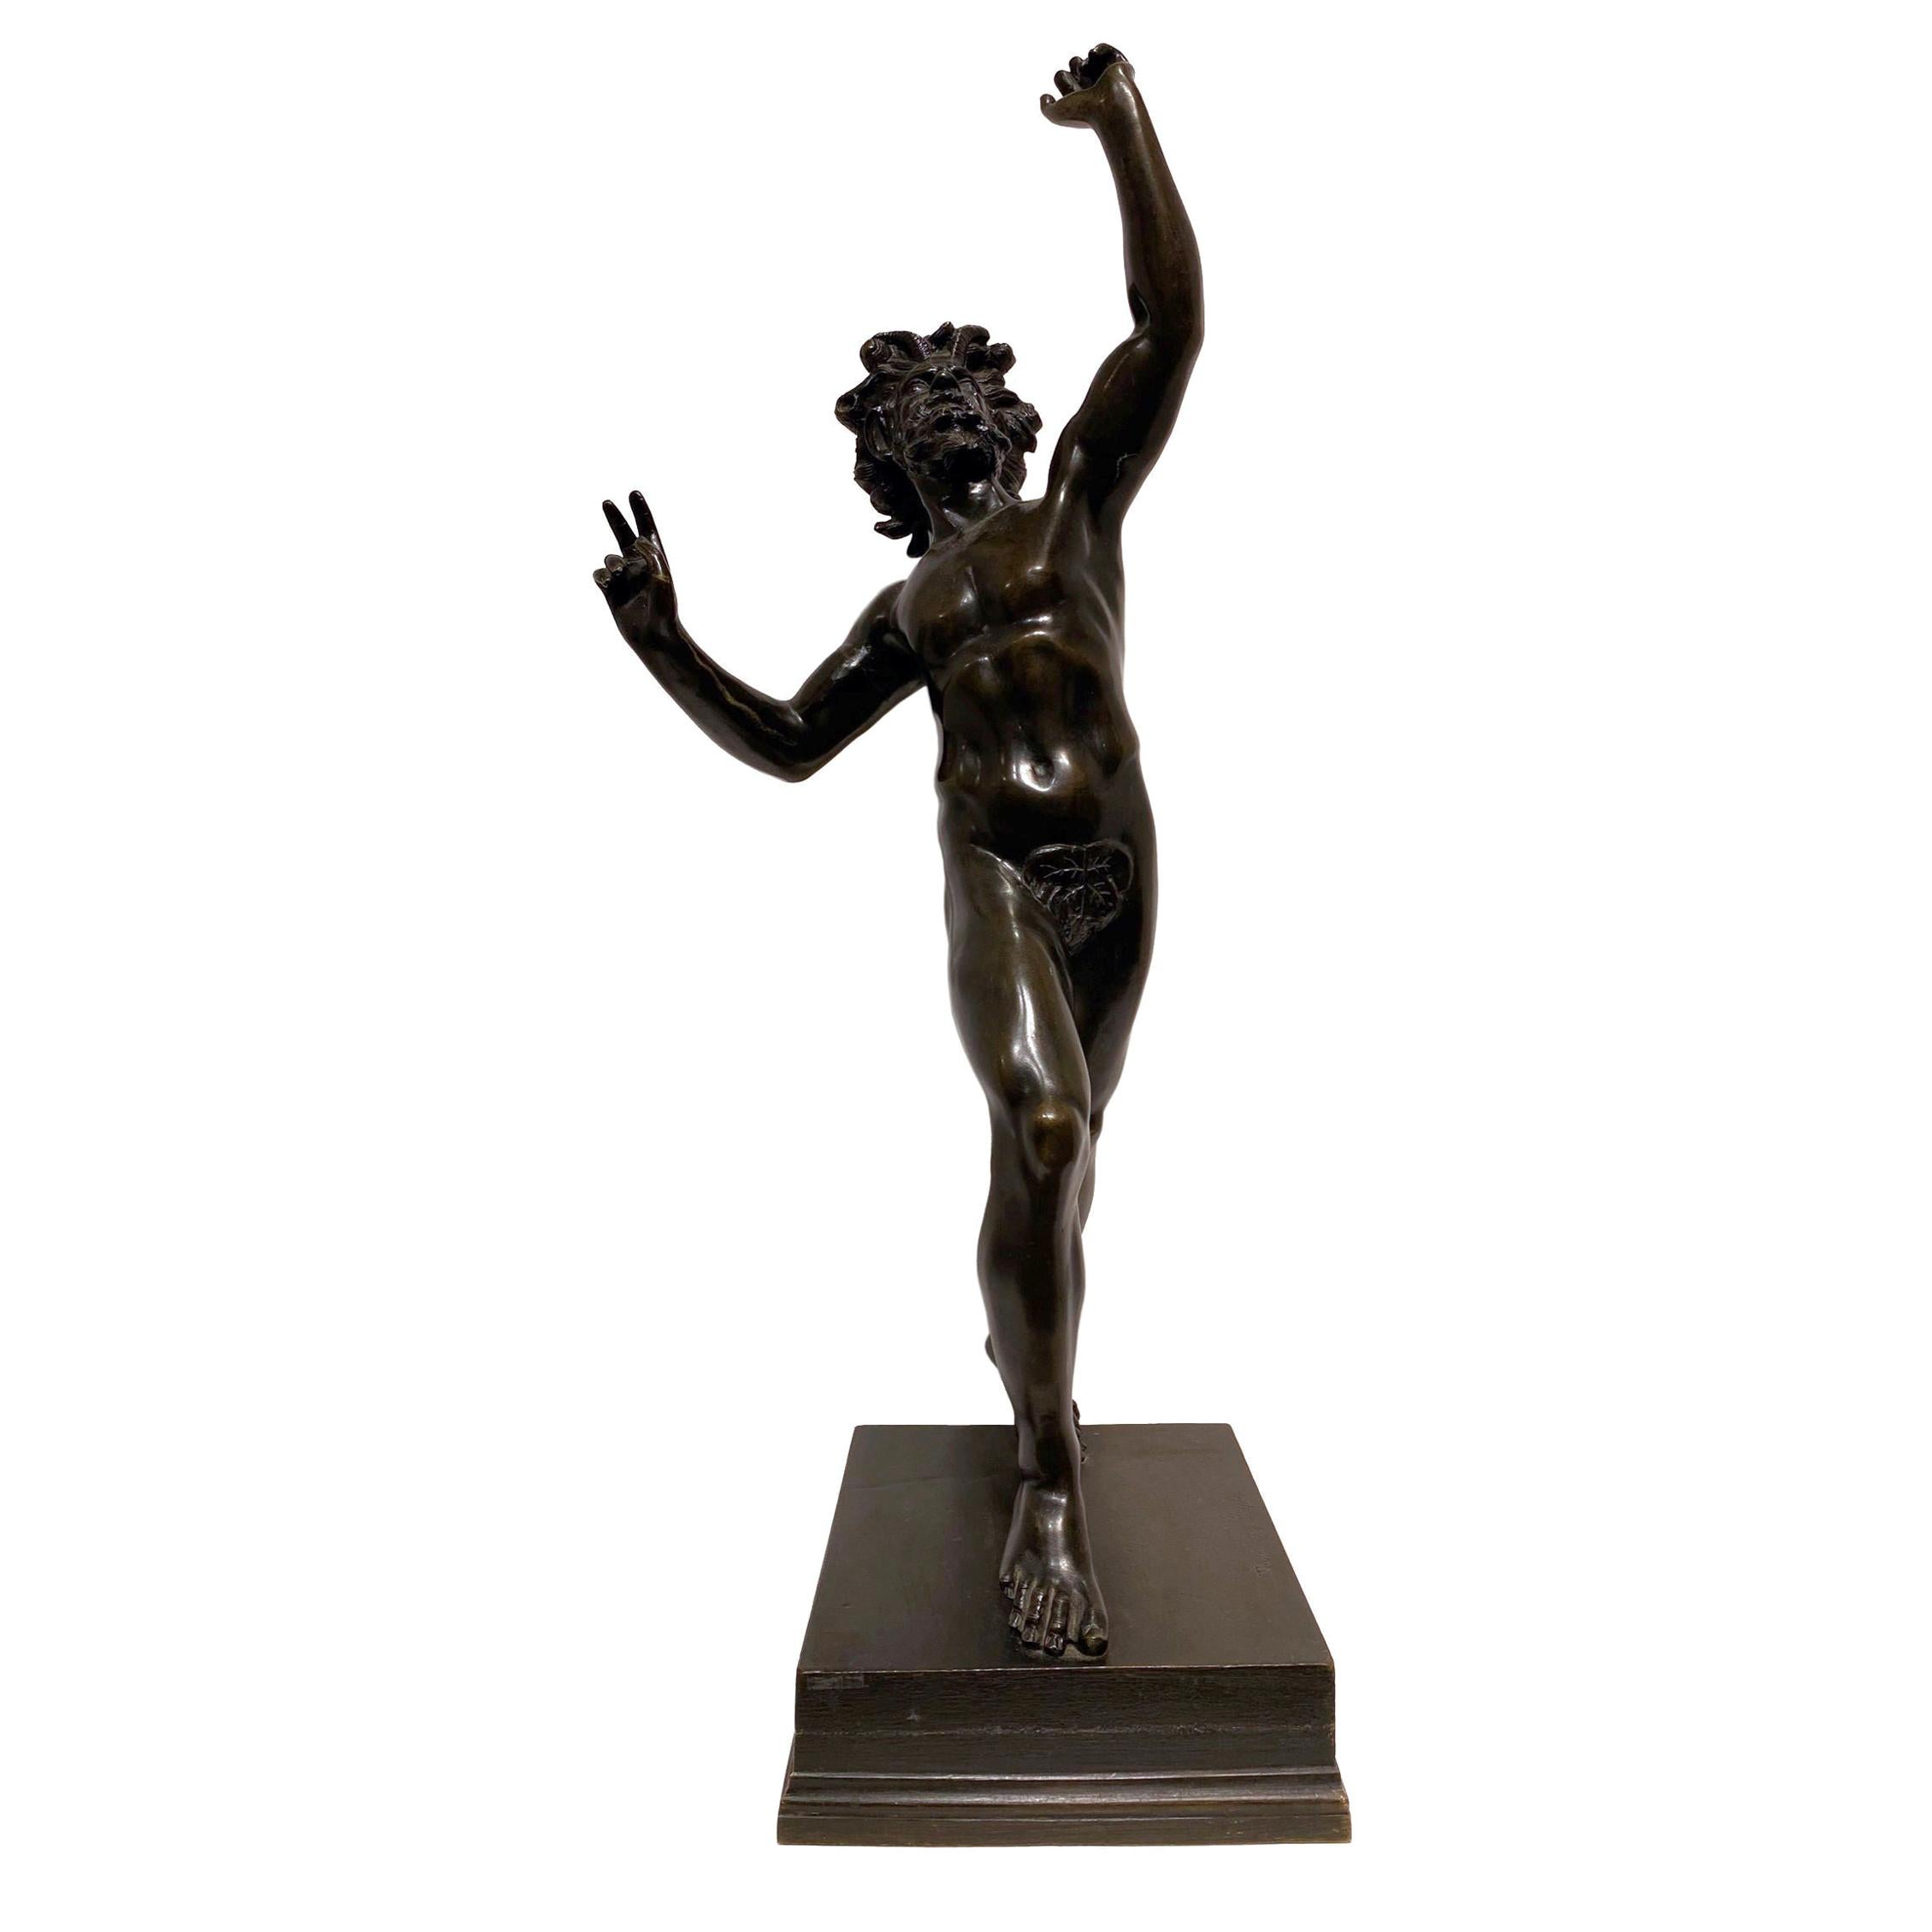 Faun Bronze Sculpture after the Ancient from Pompeii